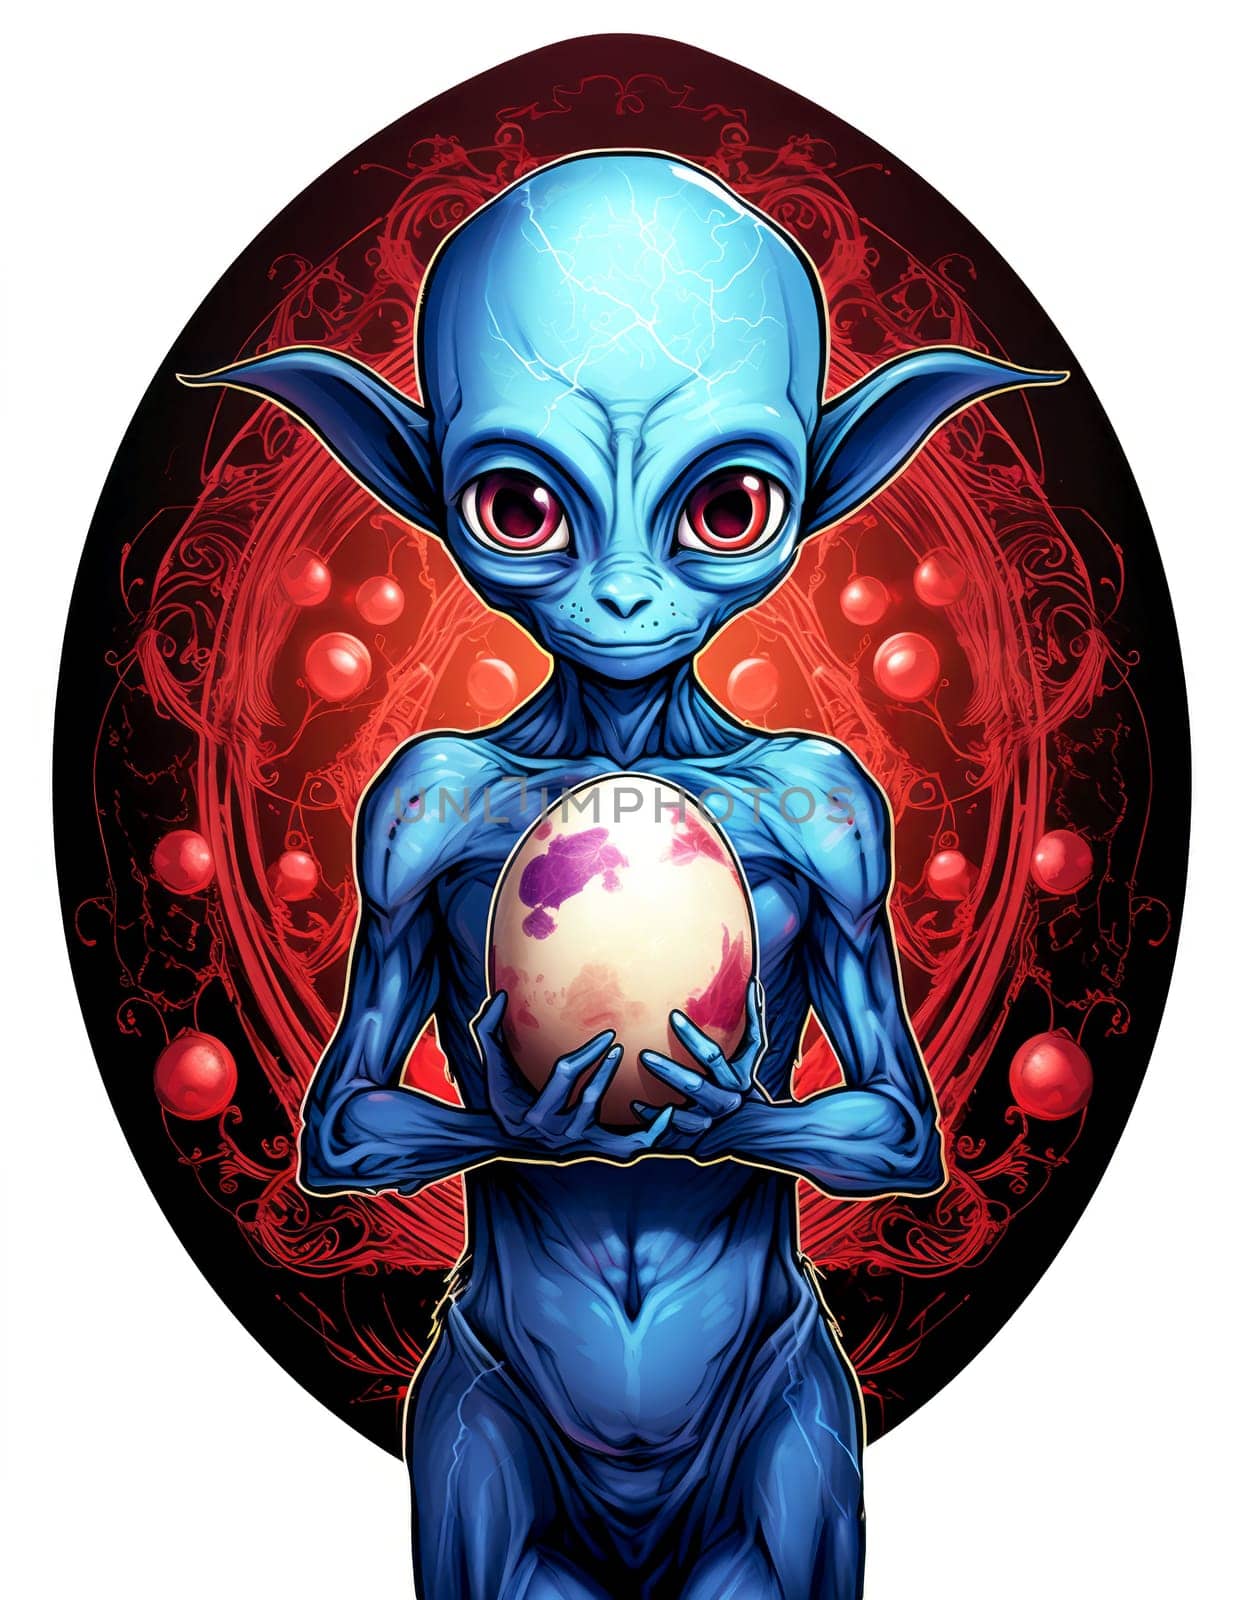 The alien is holding an Easter egg.  Cartoon sci-fi character by palinchak